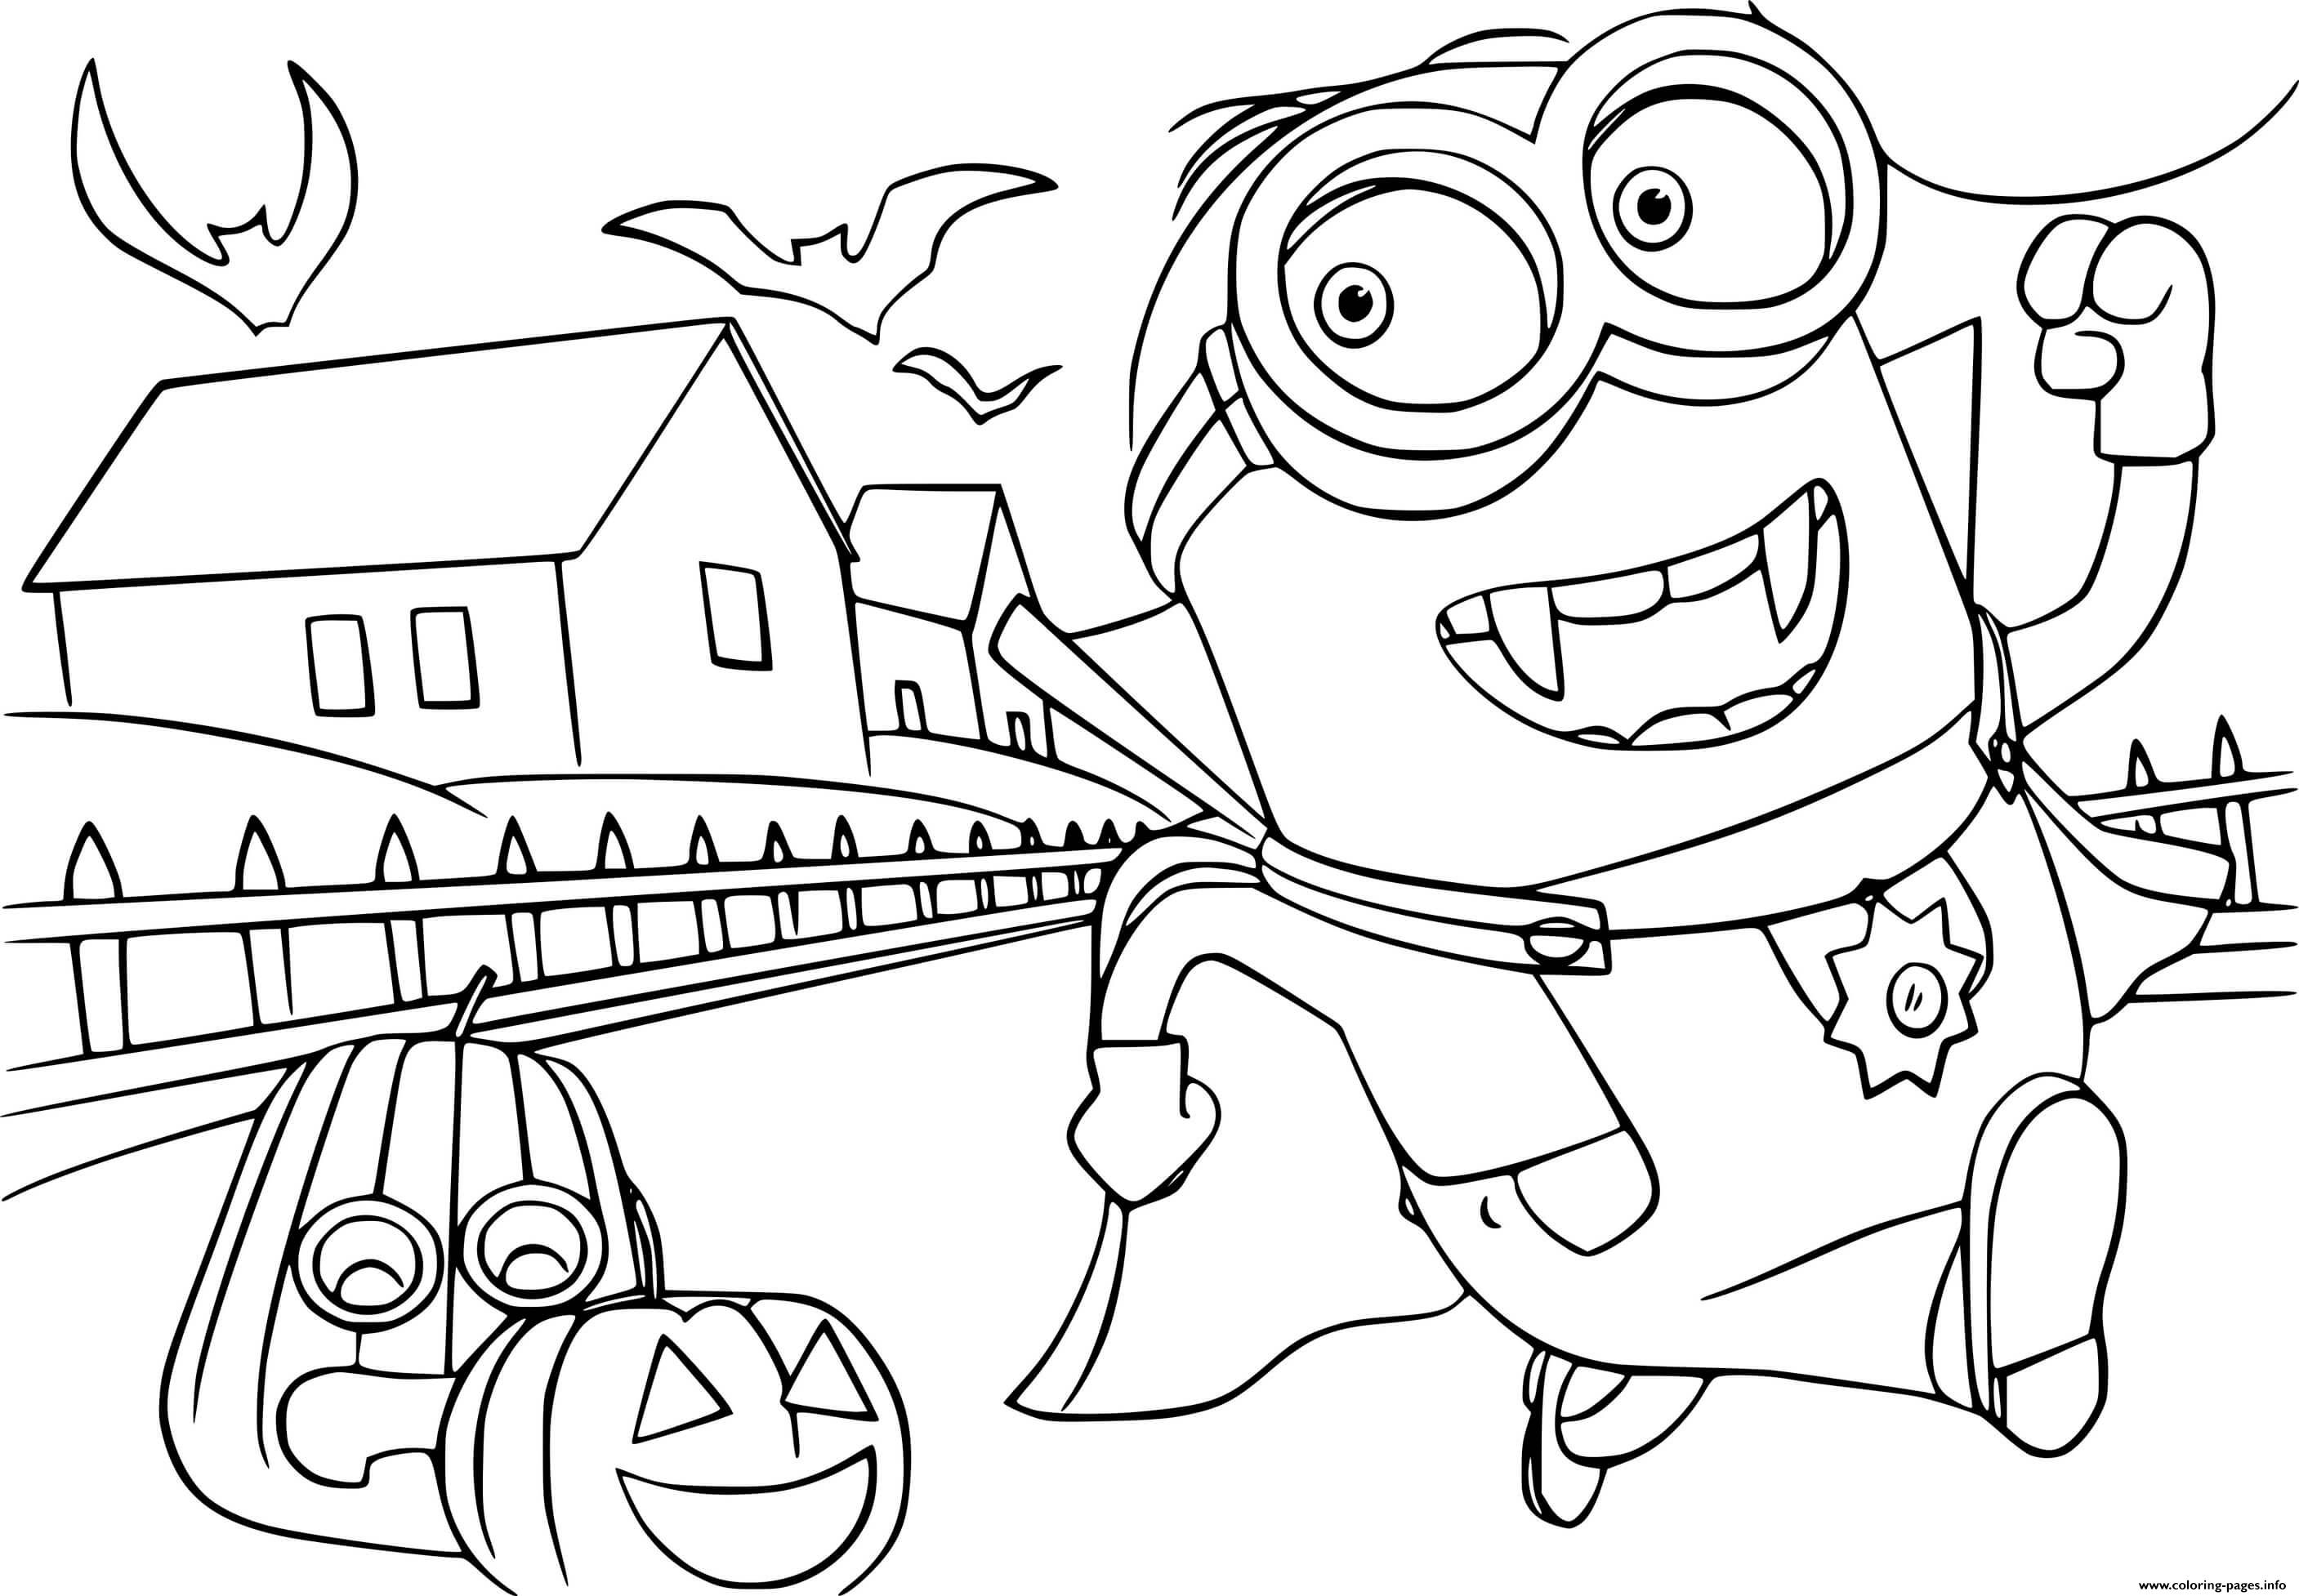 Dave Minion At Halloween coloring